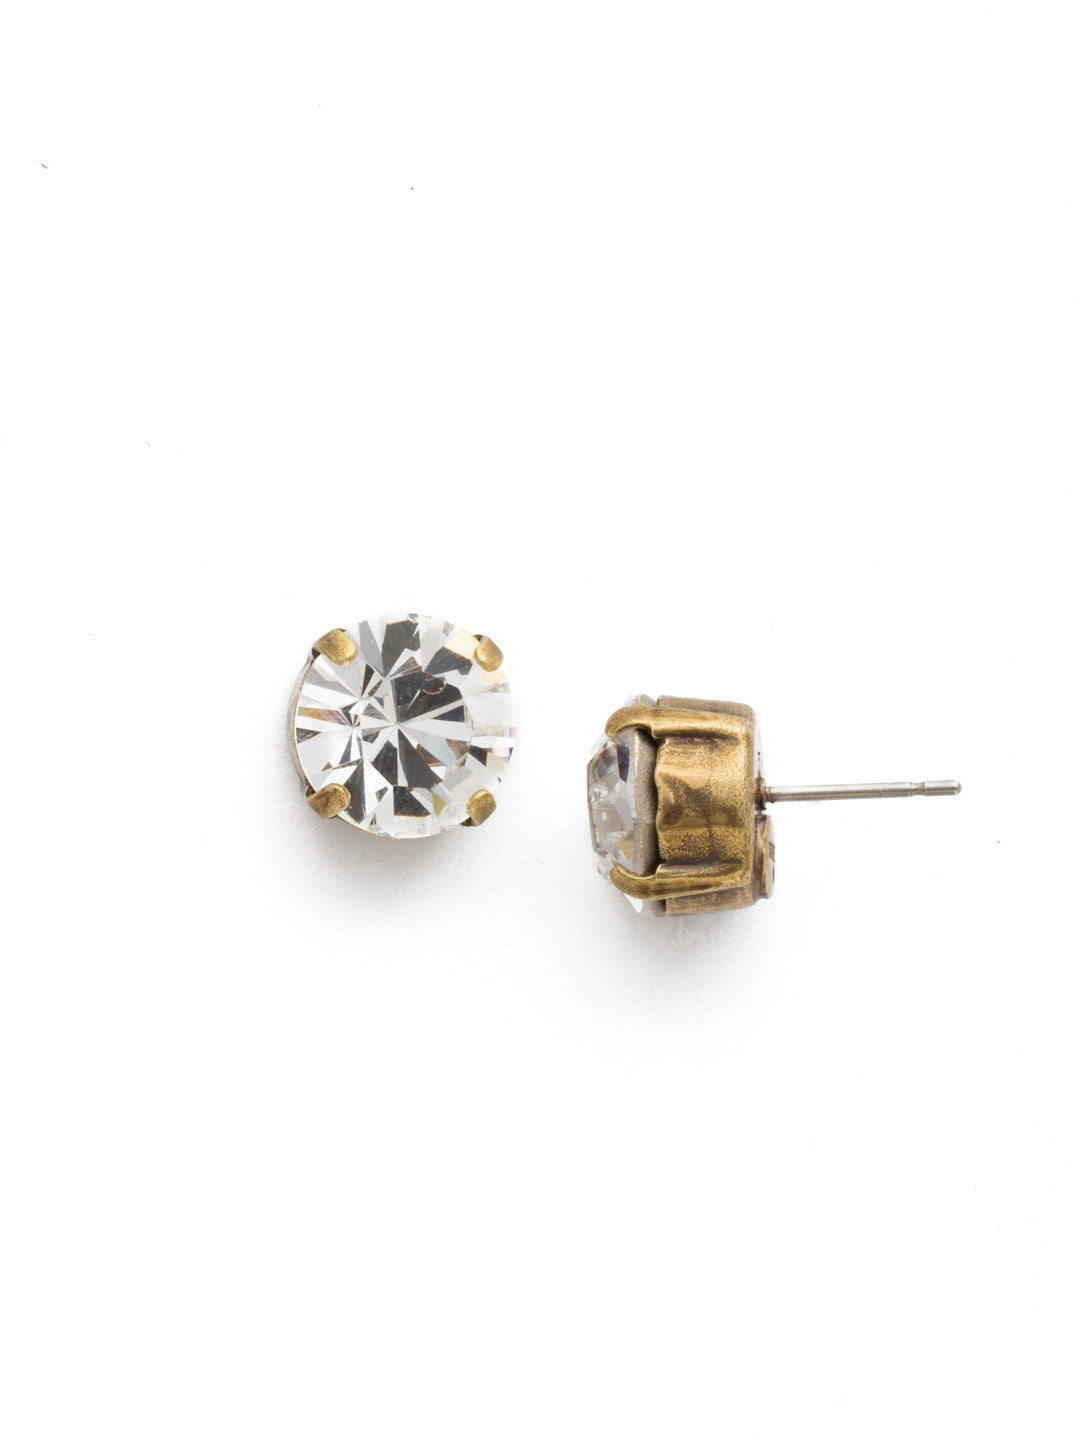 London Stud Earrings - ECM14AGCRY - <p>Everyone needs a great pair of studs. Add some classic sparkle to any occasion with these stud earrings. Need help picking a stud? <a href="https://www.sorrelli.com/blogs/sisterhood/round-stud-earrings-101-a-rundown-of-sizes-styles-and-sparkle">Check out our size guide!</a> From Sorrelli's Crystal collection in our Antique Gold-tone finish.</p>